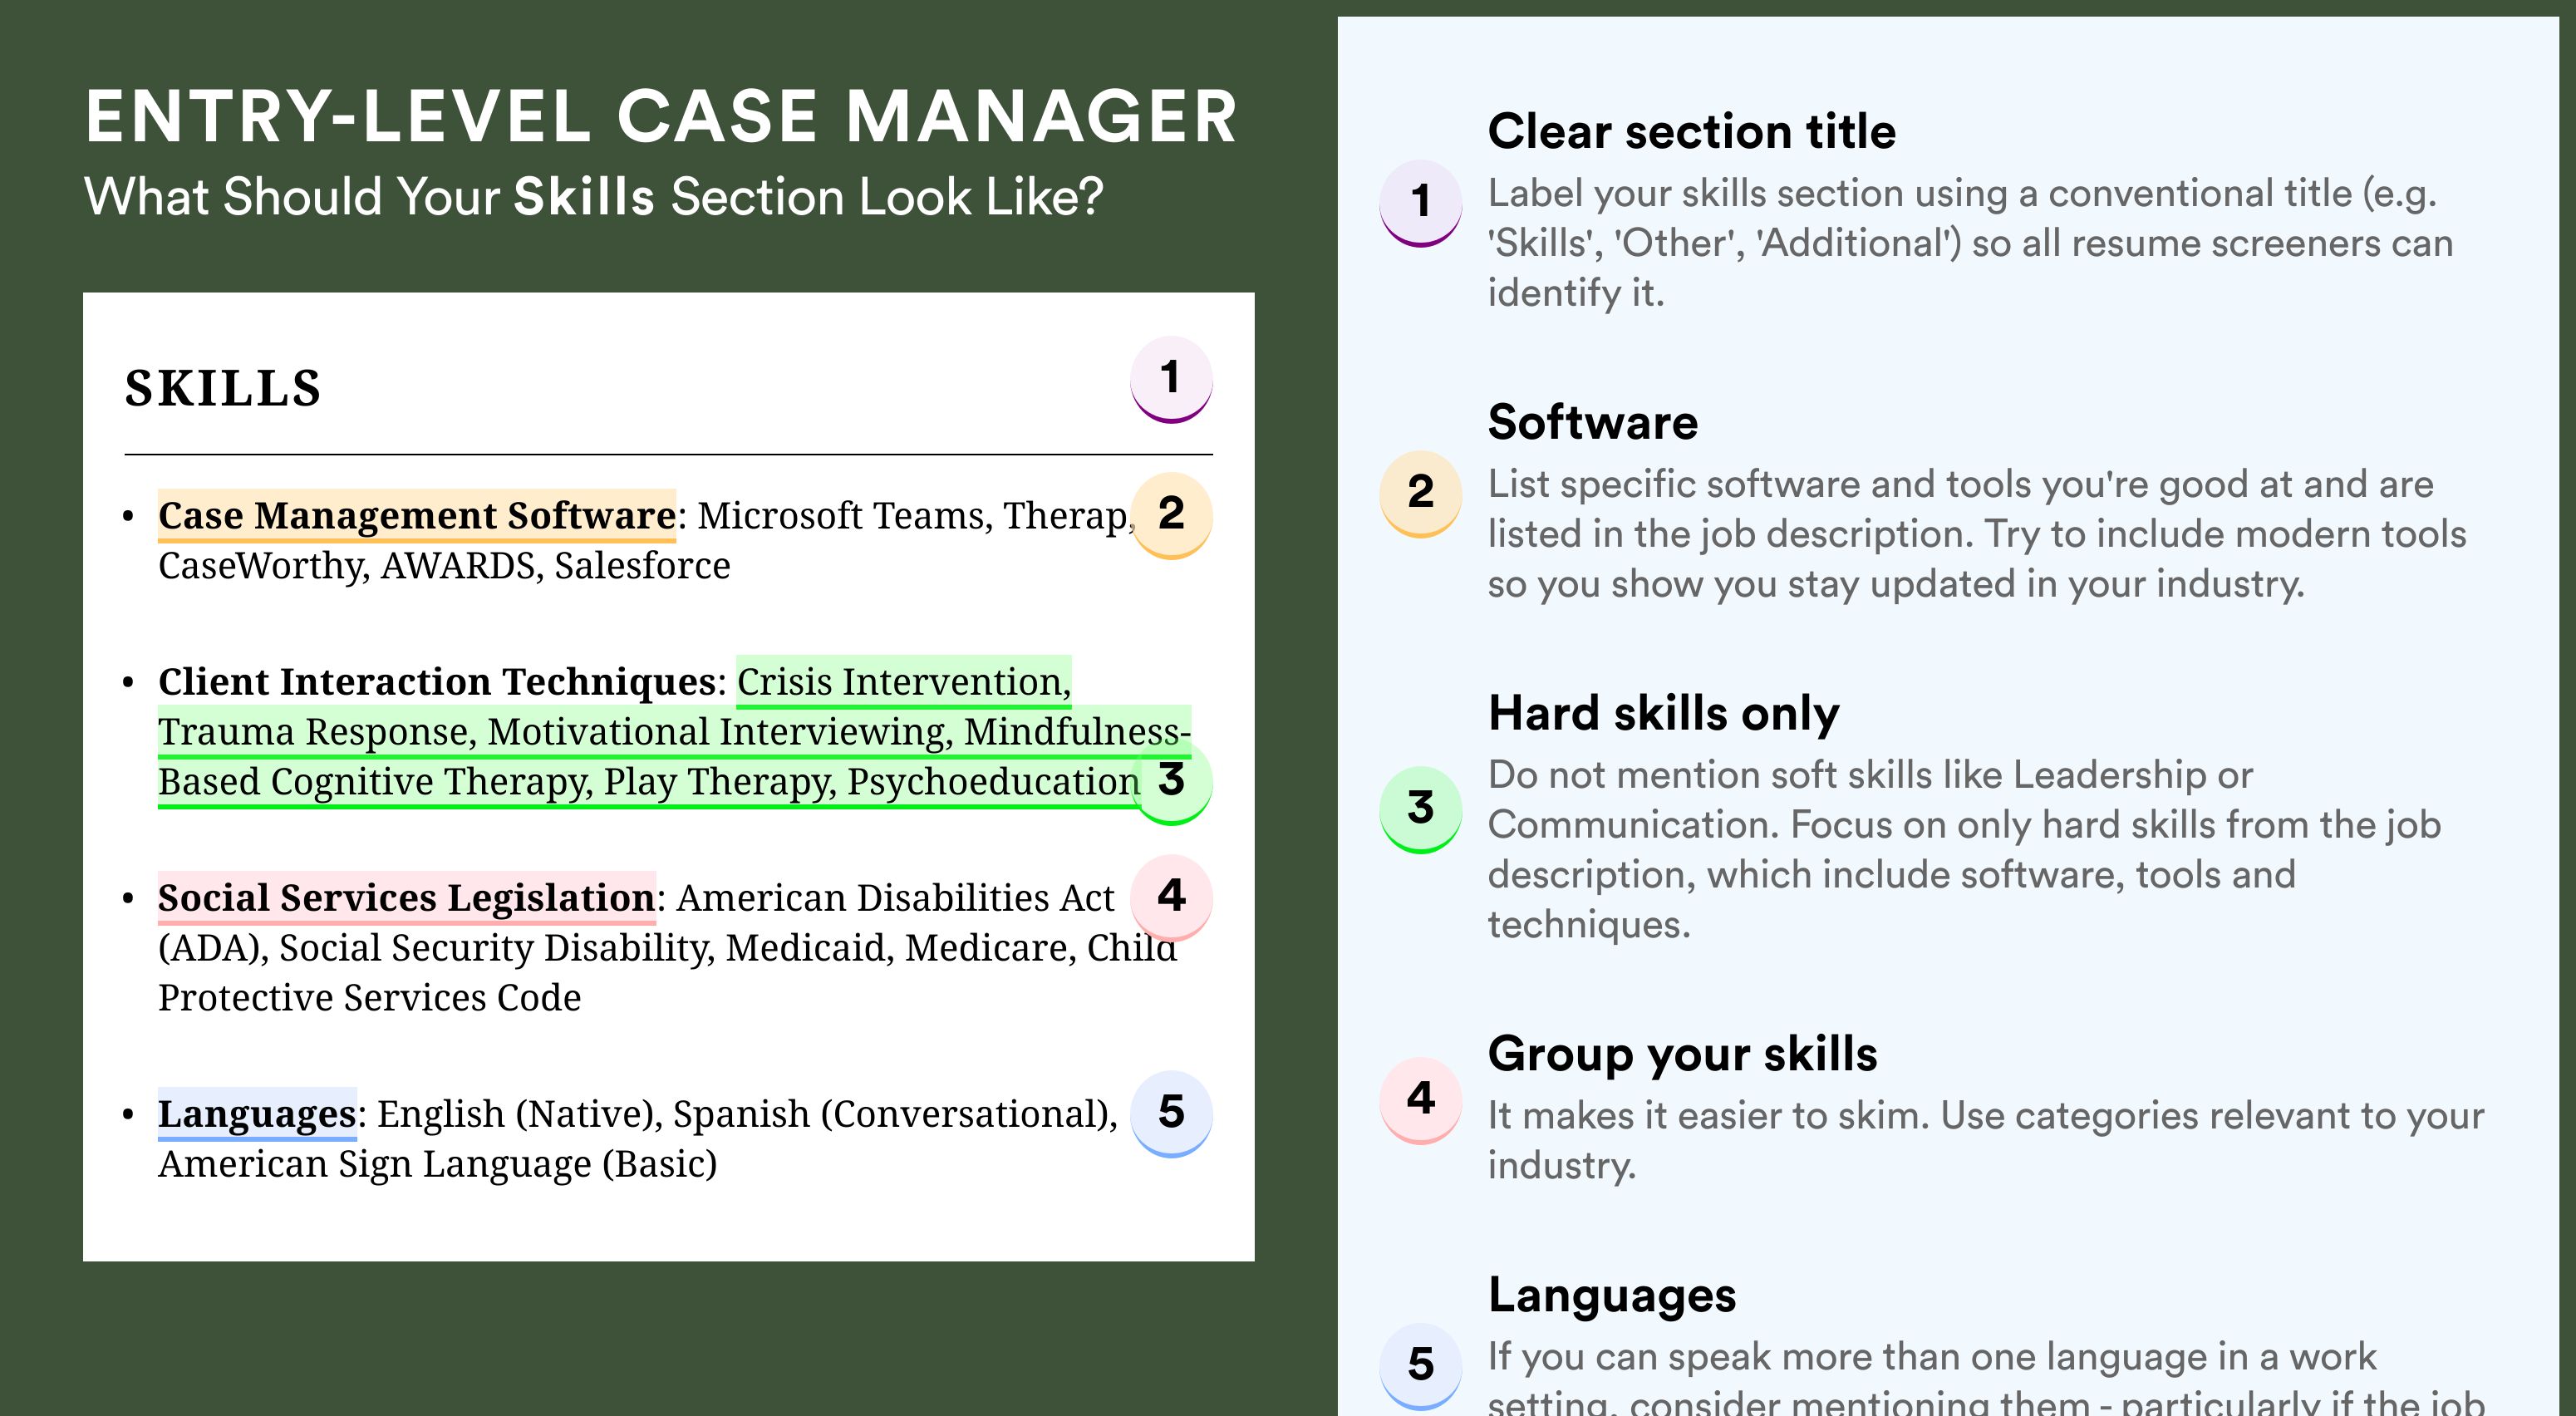 How To Write Your Skills Section - Entry-Level Case Manager Roles